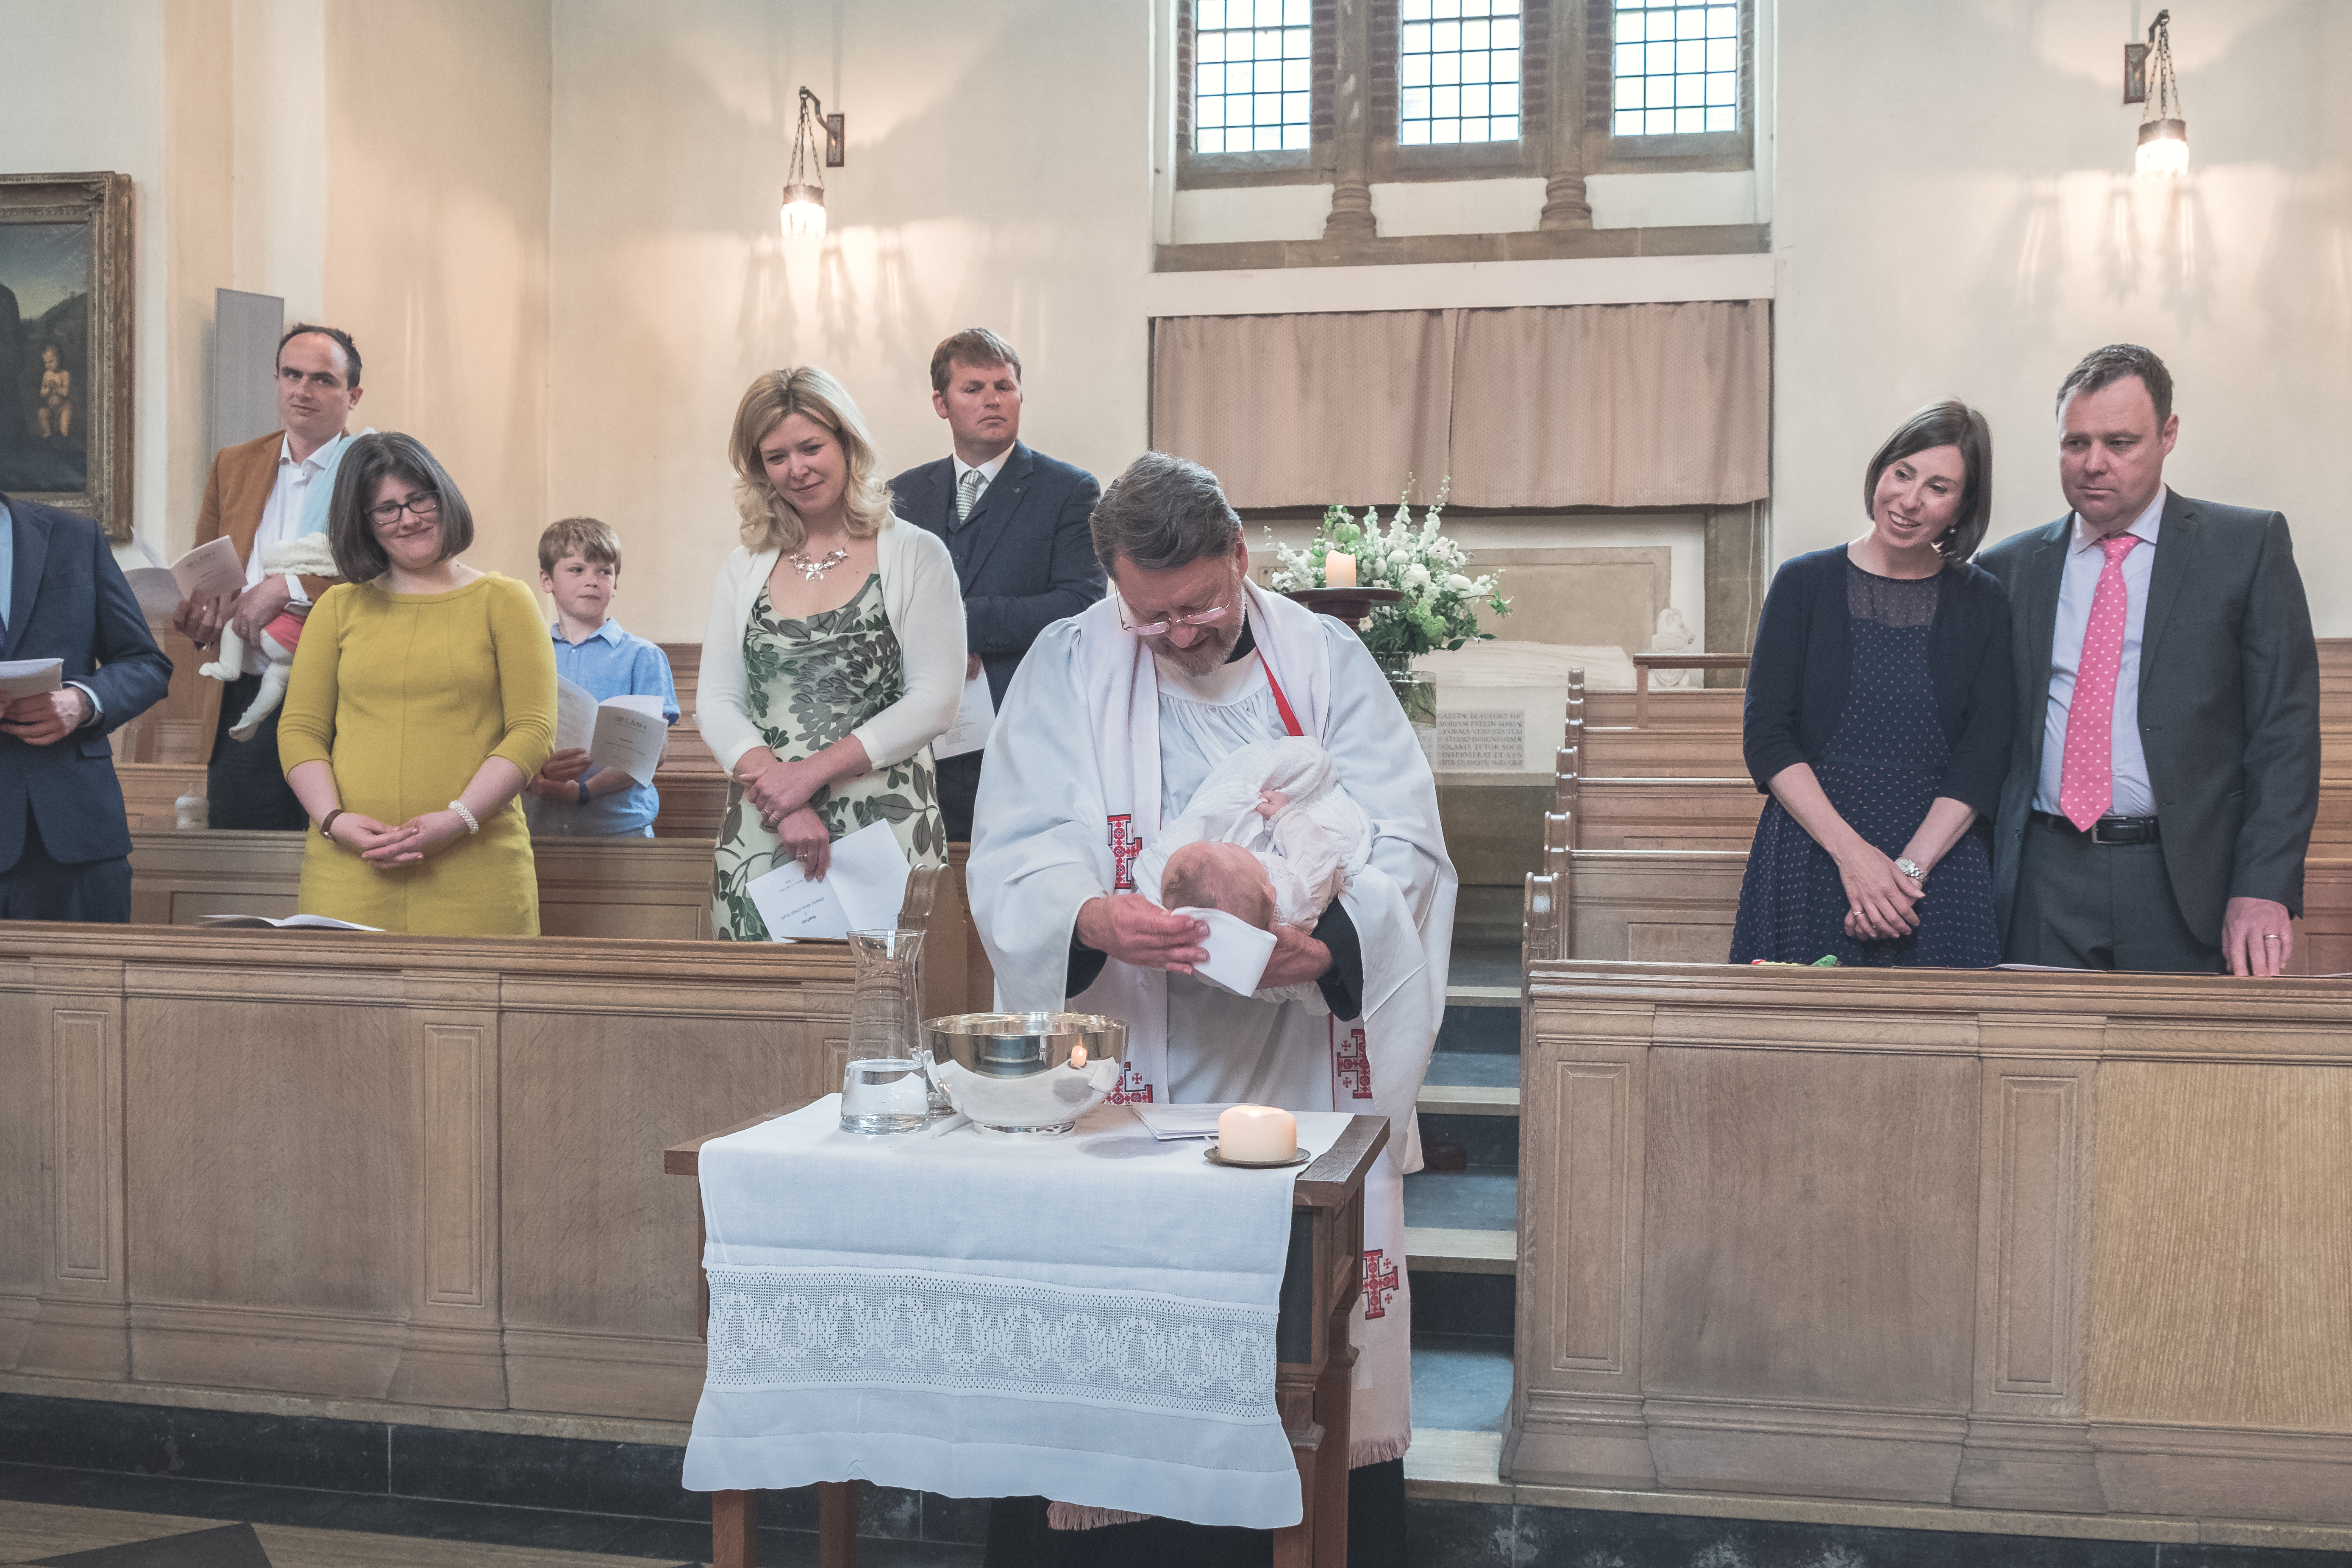 A baby being christened in the LMH Chapel